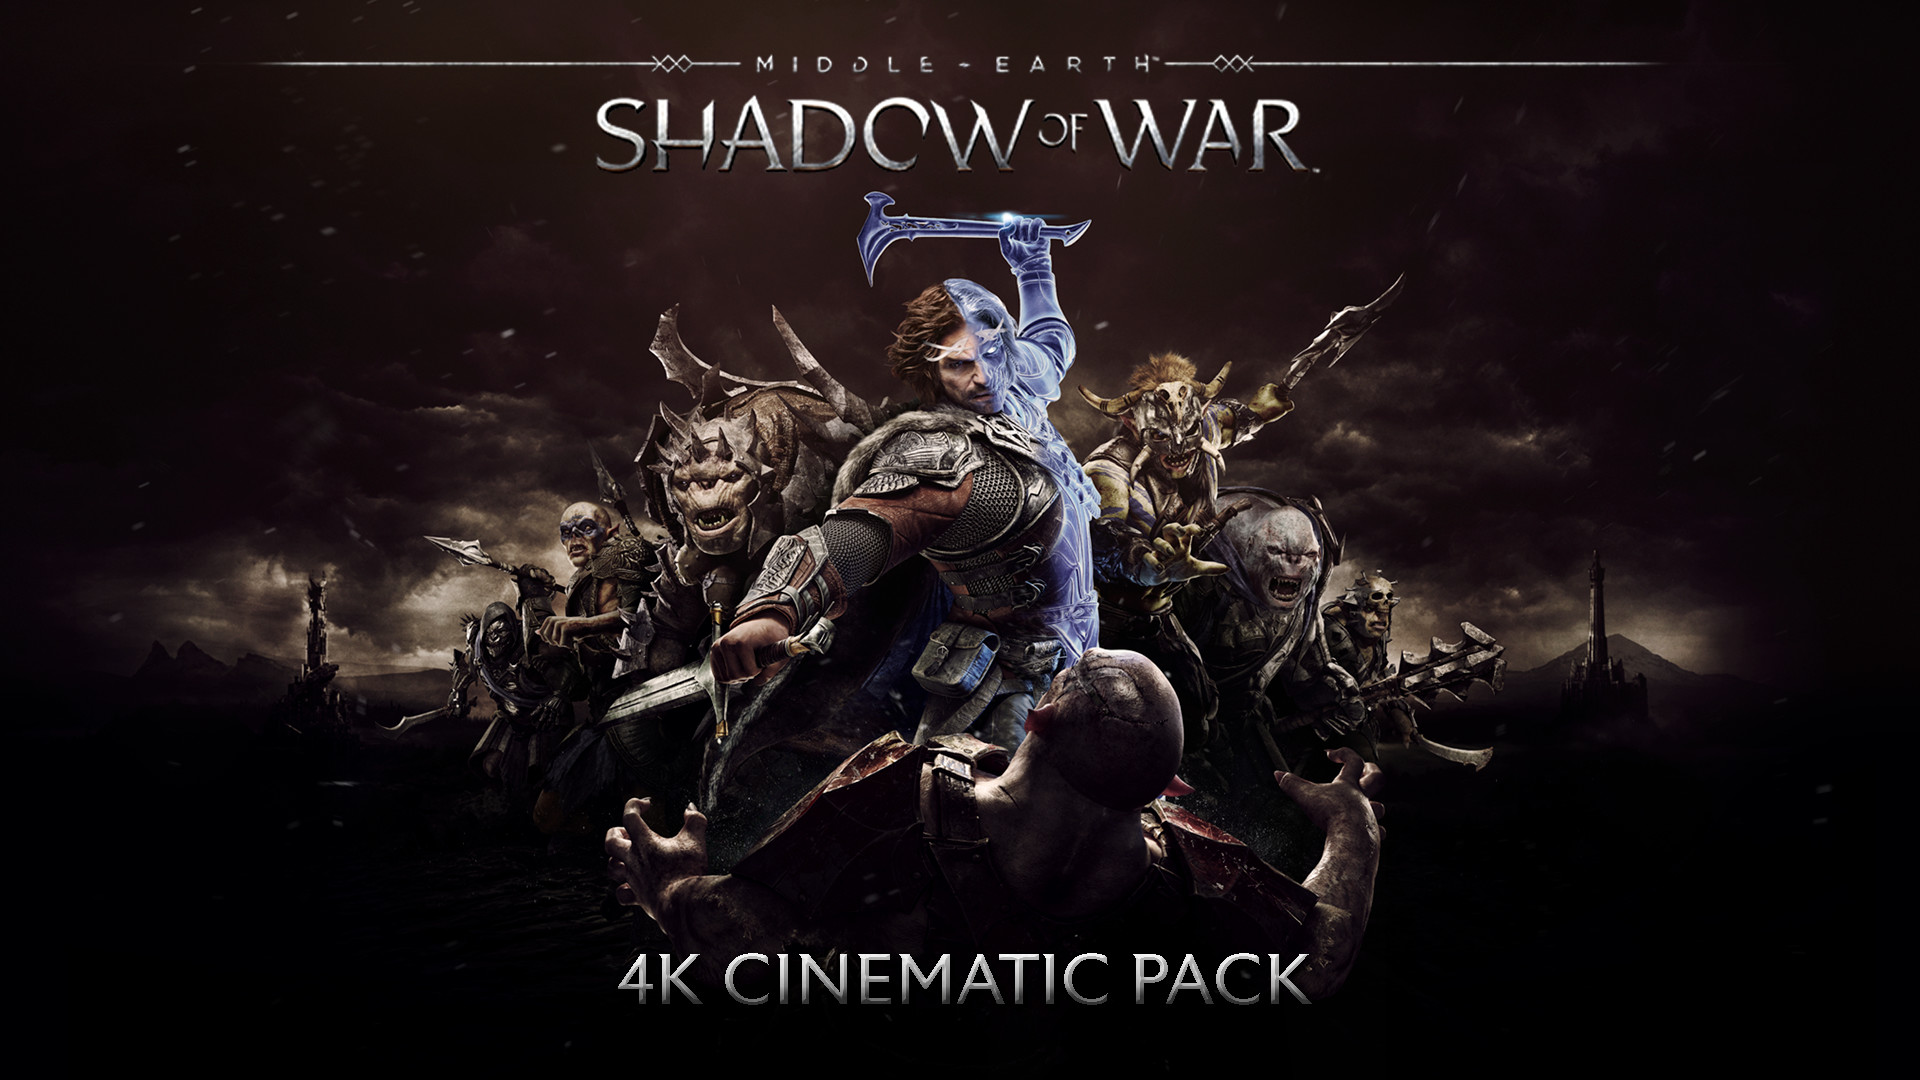 Middle-earth™: Shadow of War™ 4K Cinematic Pack Featured Screenshot #1